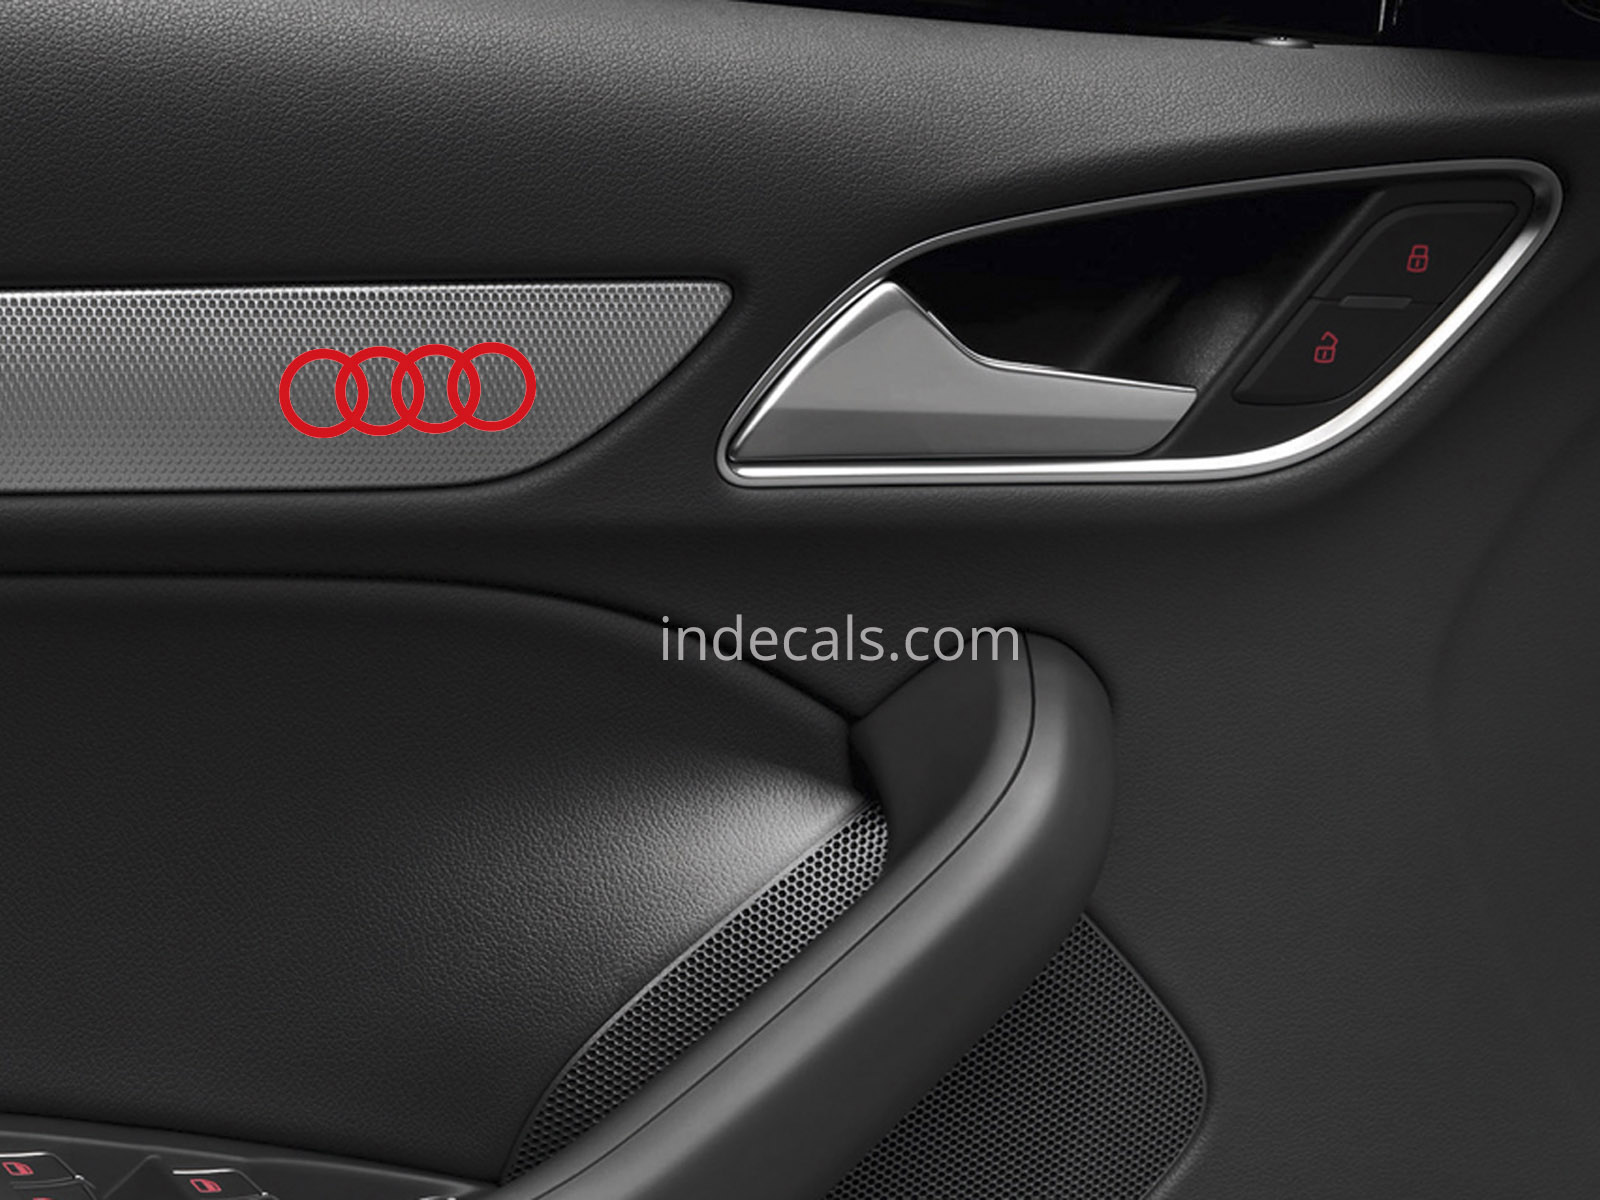 6 x Audi Rings Stickers for Door Trim - Red